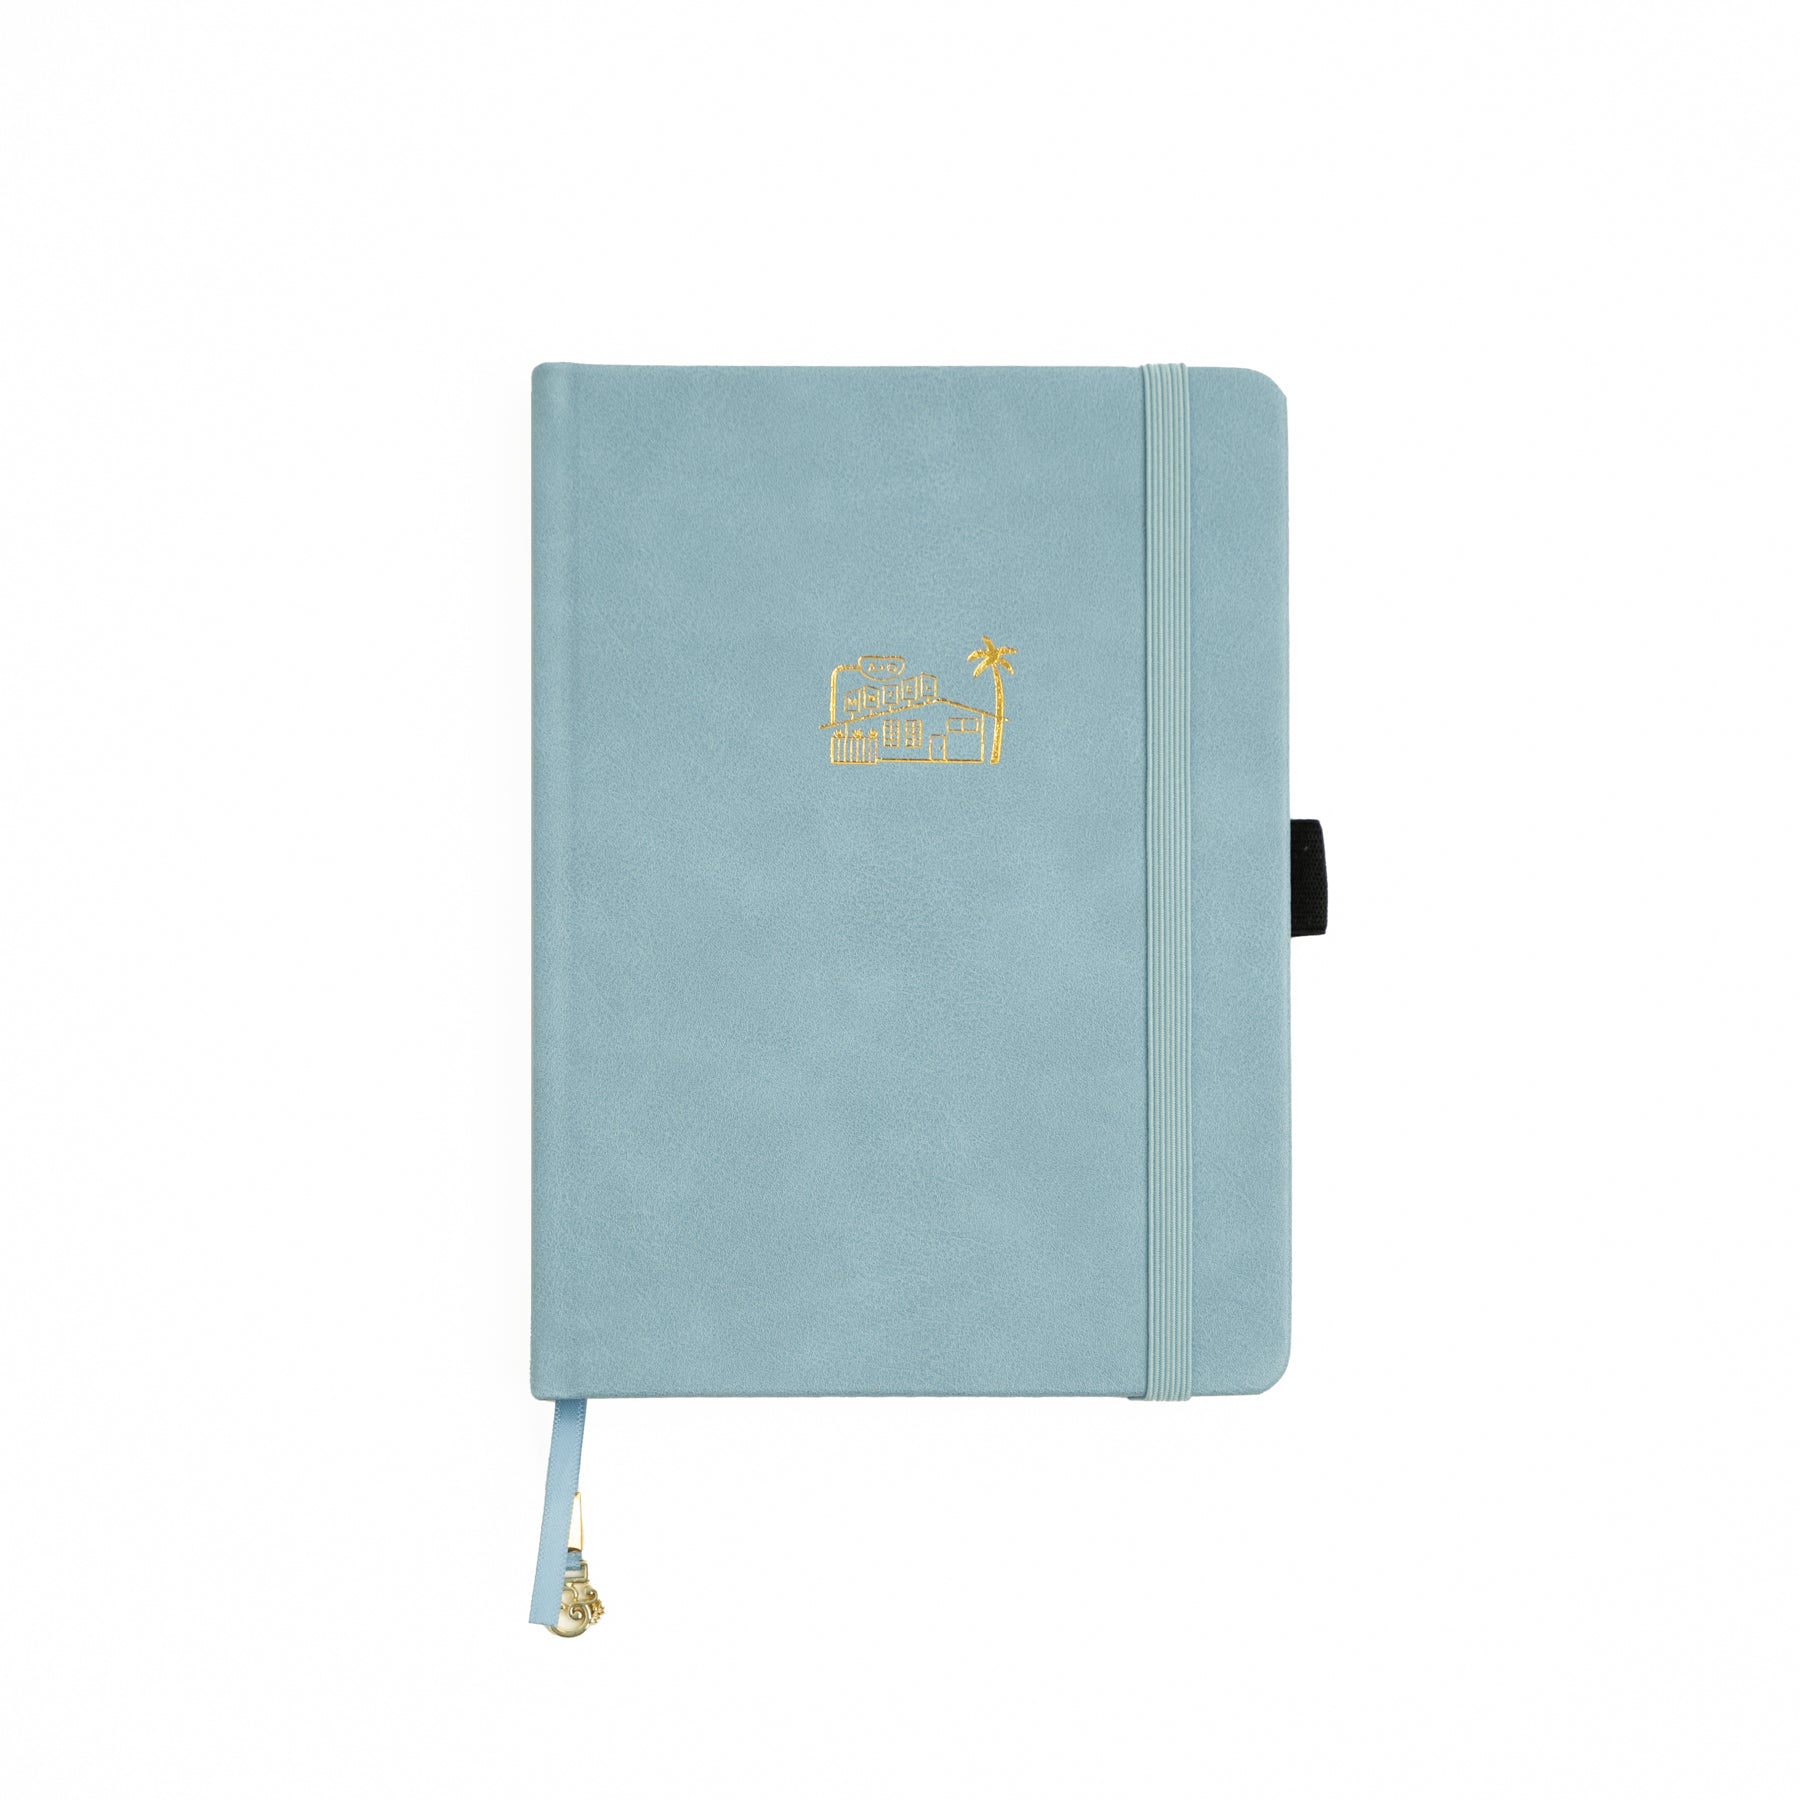 Exceed Dotted Hardcover Notebook Journal Bullet Planner 5 x 8 in Blue